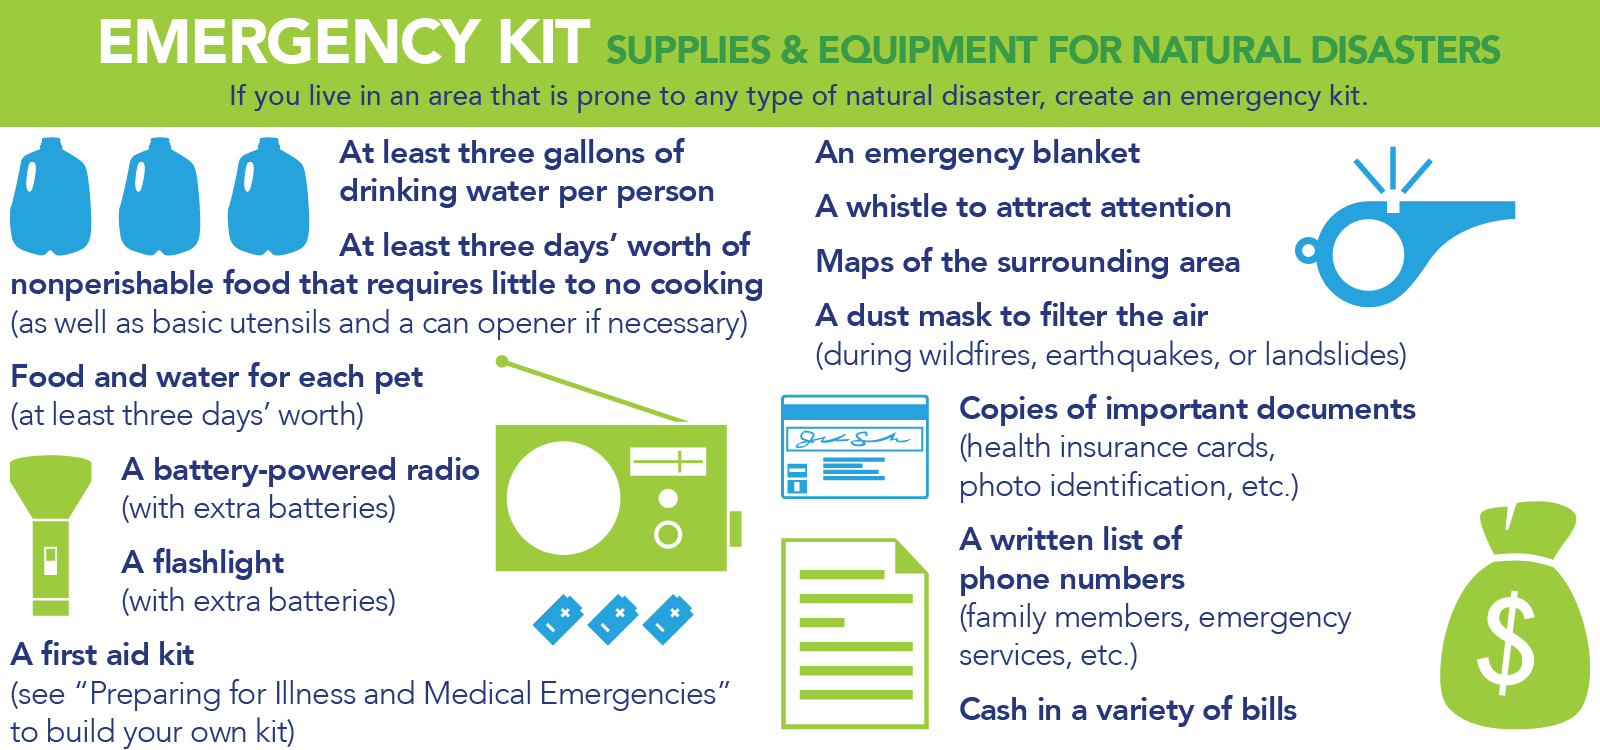 Emergency Kit Supplies and Equipment for Natural Disasters; If you live in an area that is prone to any type of natural disaster, create an emergency kit. It should include: at least three gallons of drinking water per person; at least three days’ worth of nonperishable food that requires little to no cooking (as well as basic utensils and a can opener if necessary); food and water for each pet (at least three days’ worth); a battery-powered radio (with extra batteries); a flashlight (with extra batteries); a first aid kit (see “Preparing for Illness and Medical Emergencies” to build your own kit); an emergency blanket; a whistle to attract attention; maps of the surrounding area; a dust mask to filter the air (during wildfires, earthquakes, or landslides); copies of important documents (health insurance cards, photo identification, etc.); a written list of phone numbers (family members, emergency services, etc.); and cash in a variety of bills.